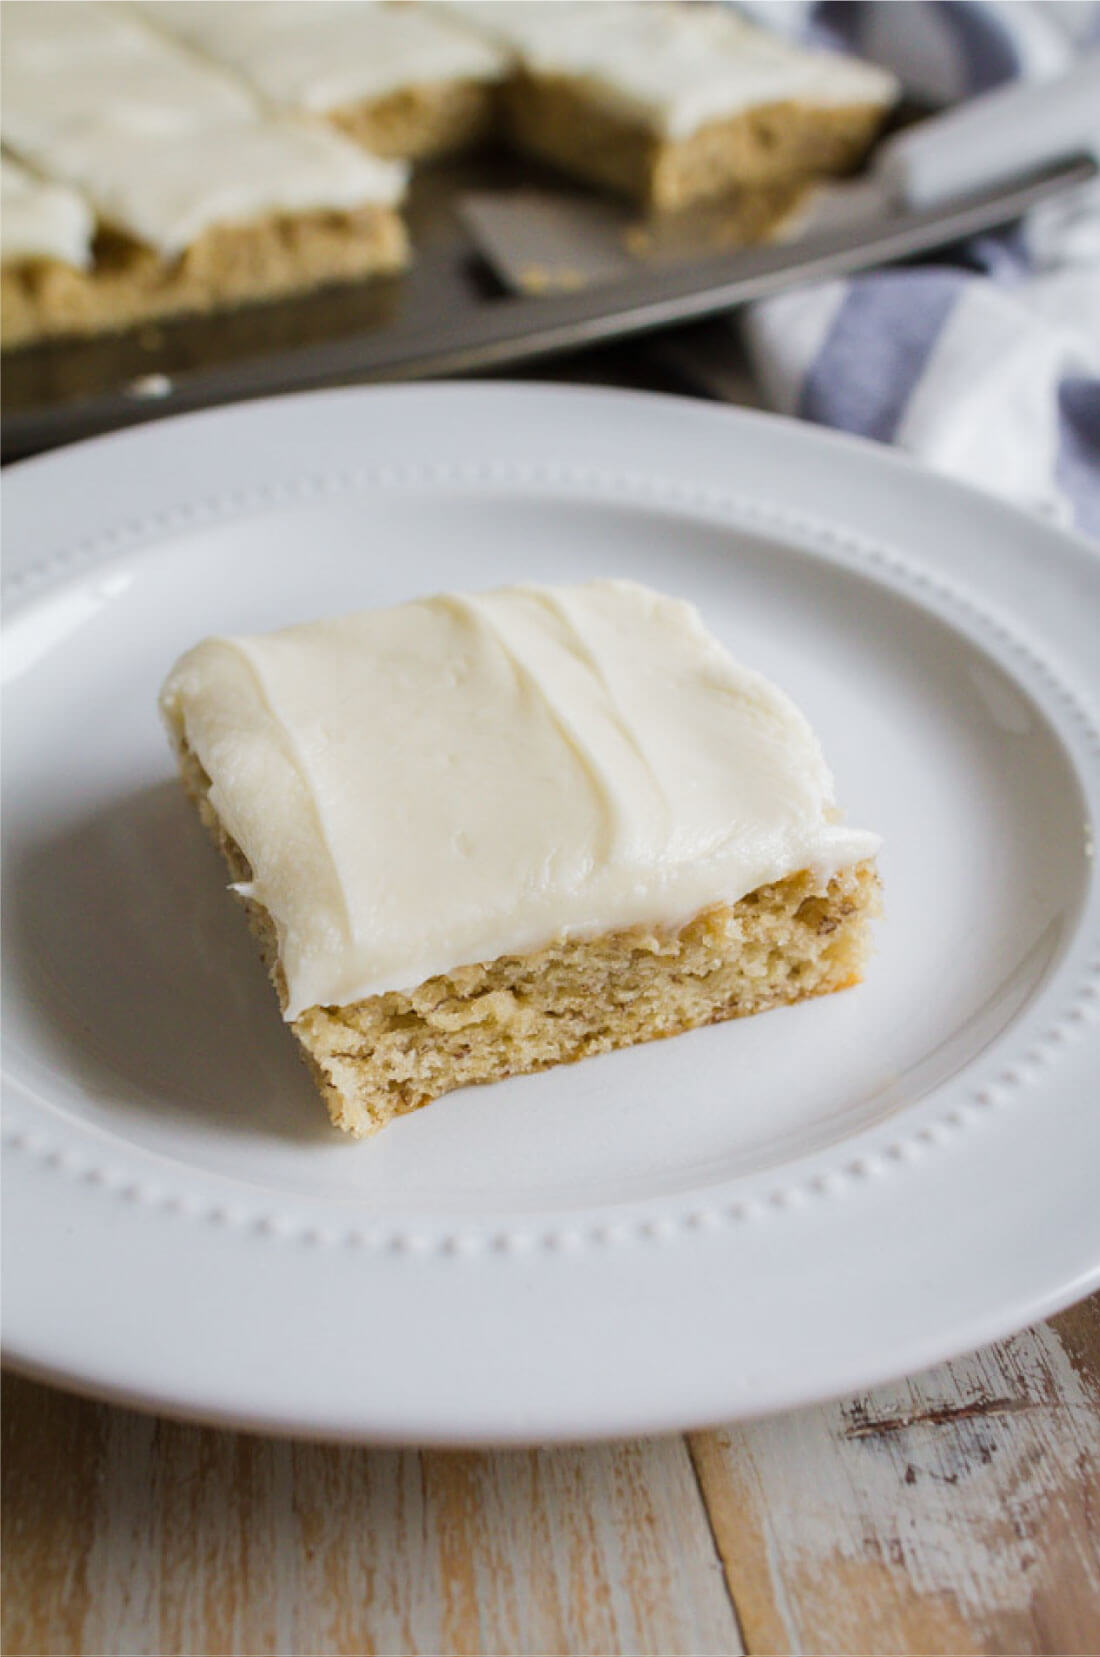 Frosted Banana Bars Recipe - use overripe bananas to make this recipe with cream cheese frosting. Up close.